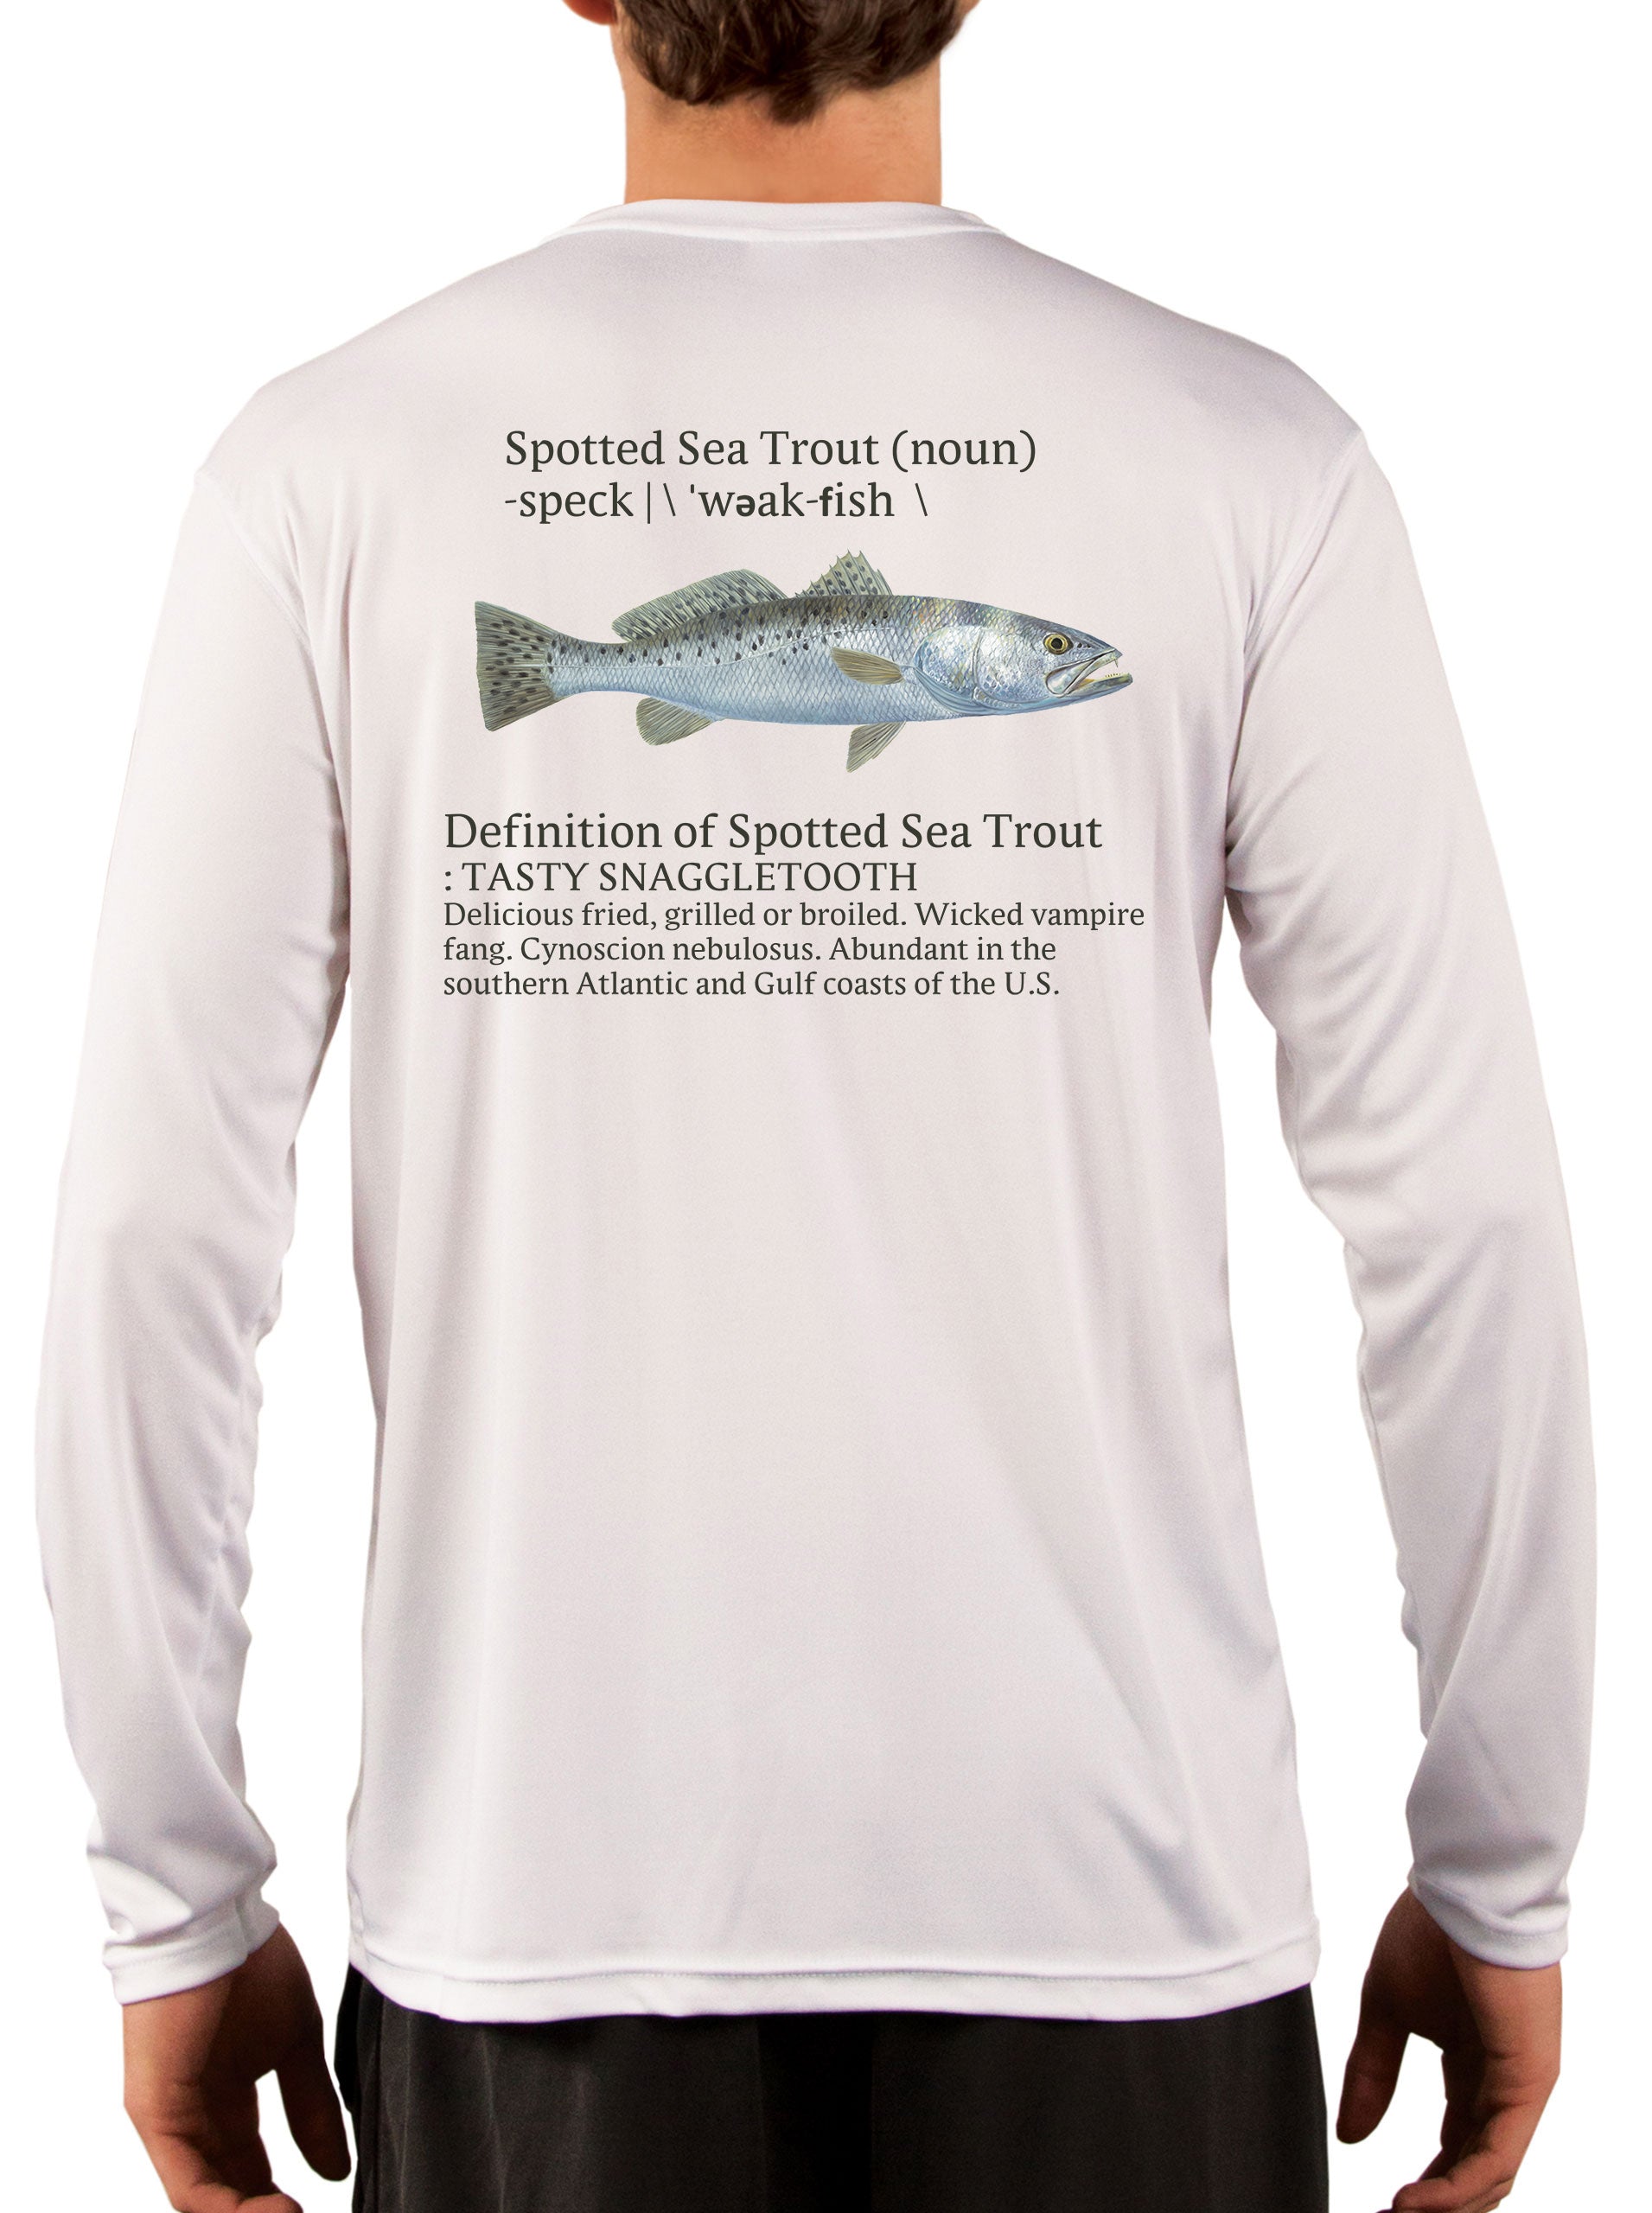 Speckled Trout Fishing Shirts for Men Skiff Inshore - UV Protected +50 Sun Protection with Moisture Wicking Technology 2XL / White